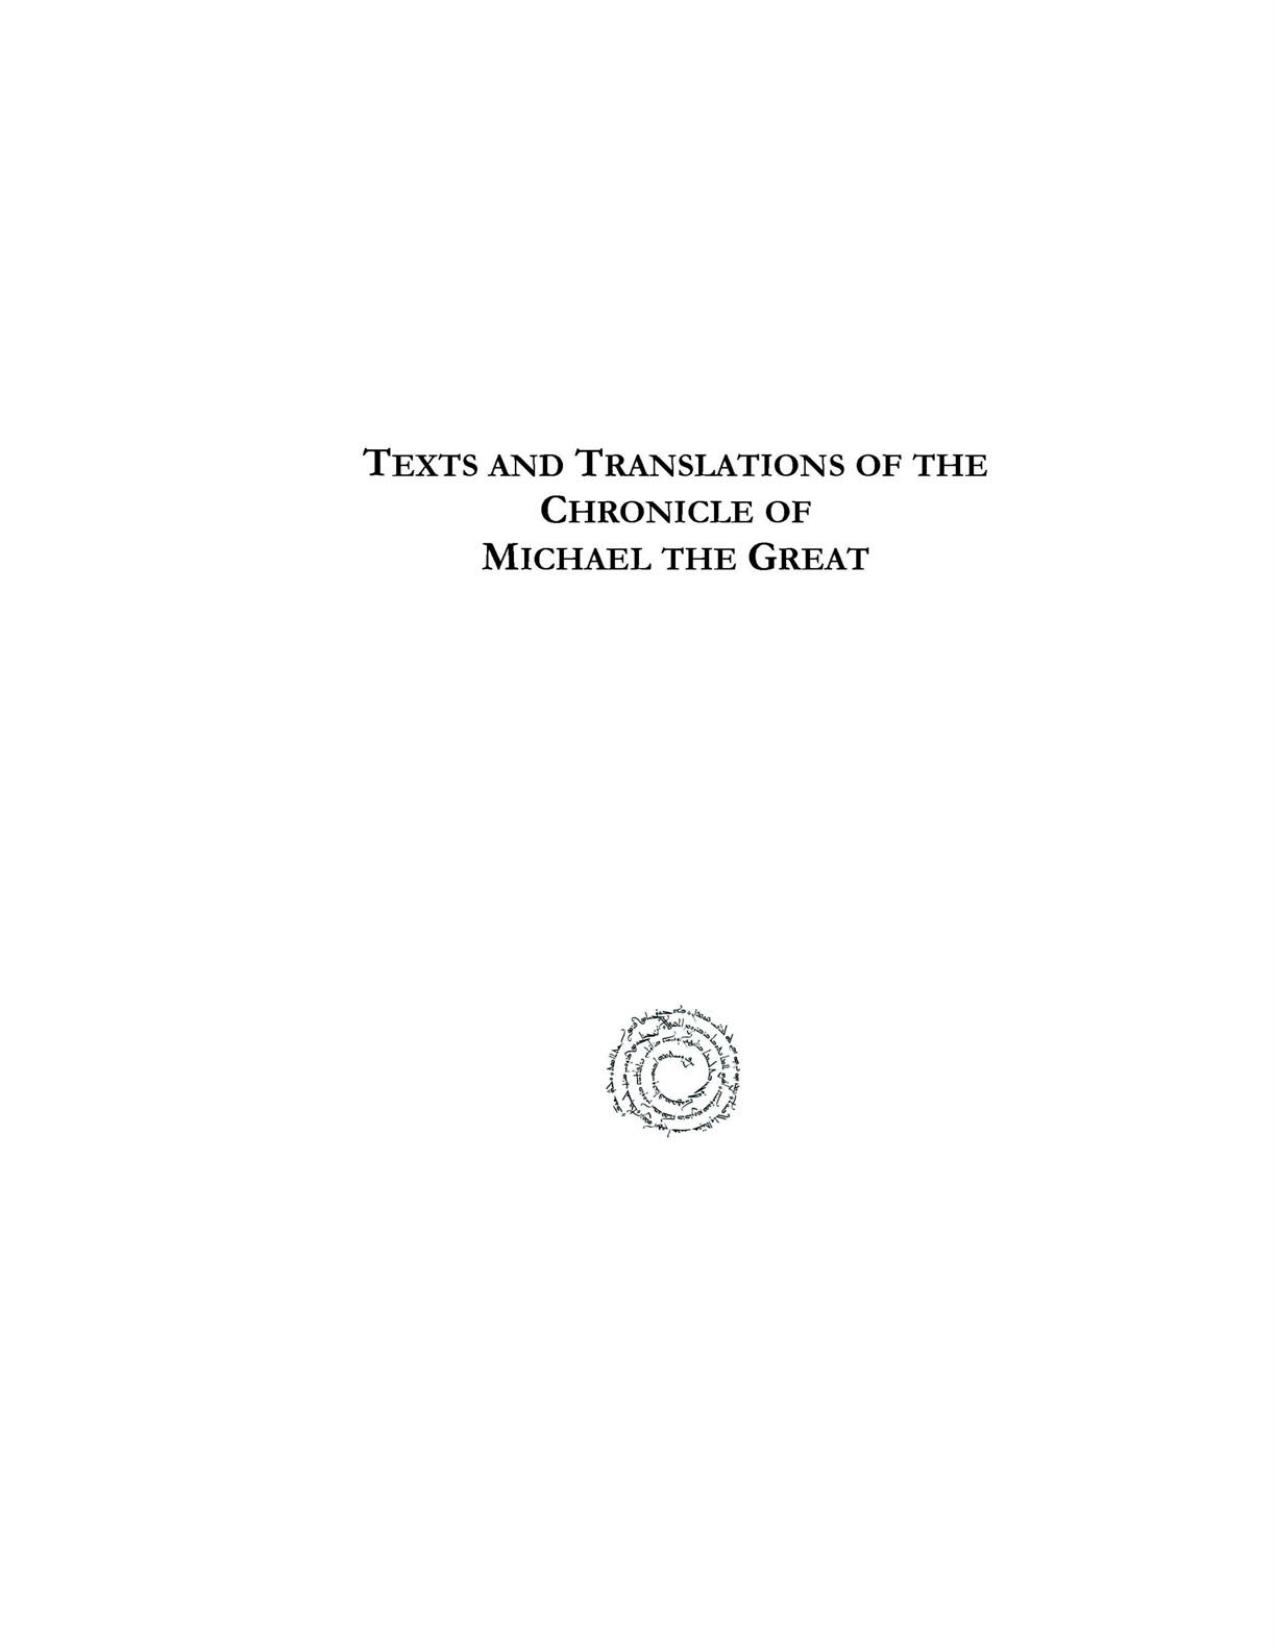 Texts and Translations of the Chronicle of Michael the Great, Volume 10: French Translation of the Armenian Epitome (Version I) of the Chronicle of Michael the Great by Victor Langlois (translator)